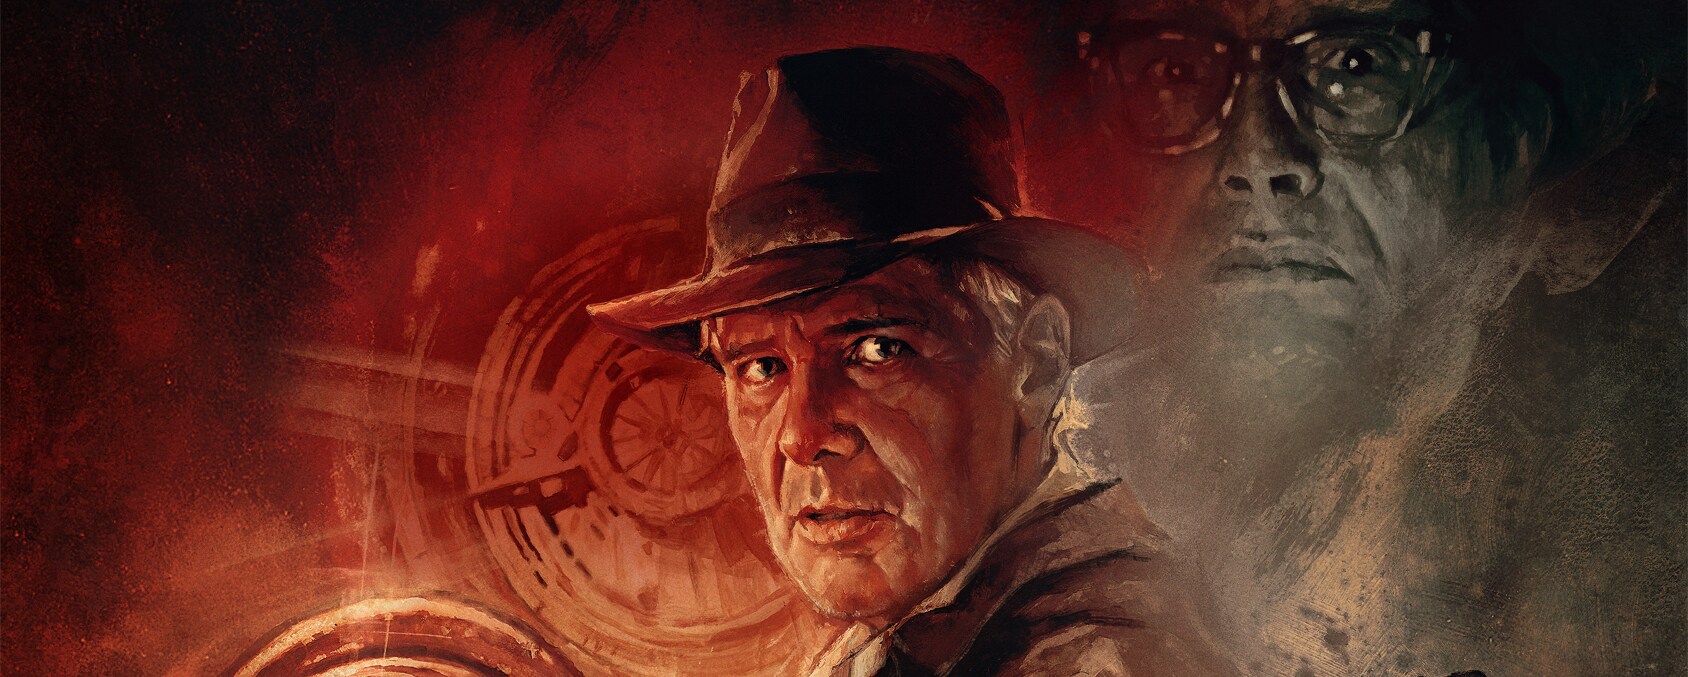 Indiana Jones Disney Plus Series In The Works May Already Be Canceled